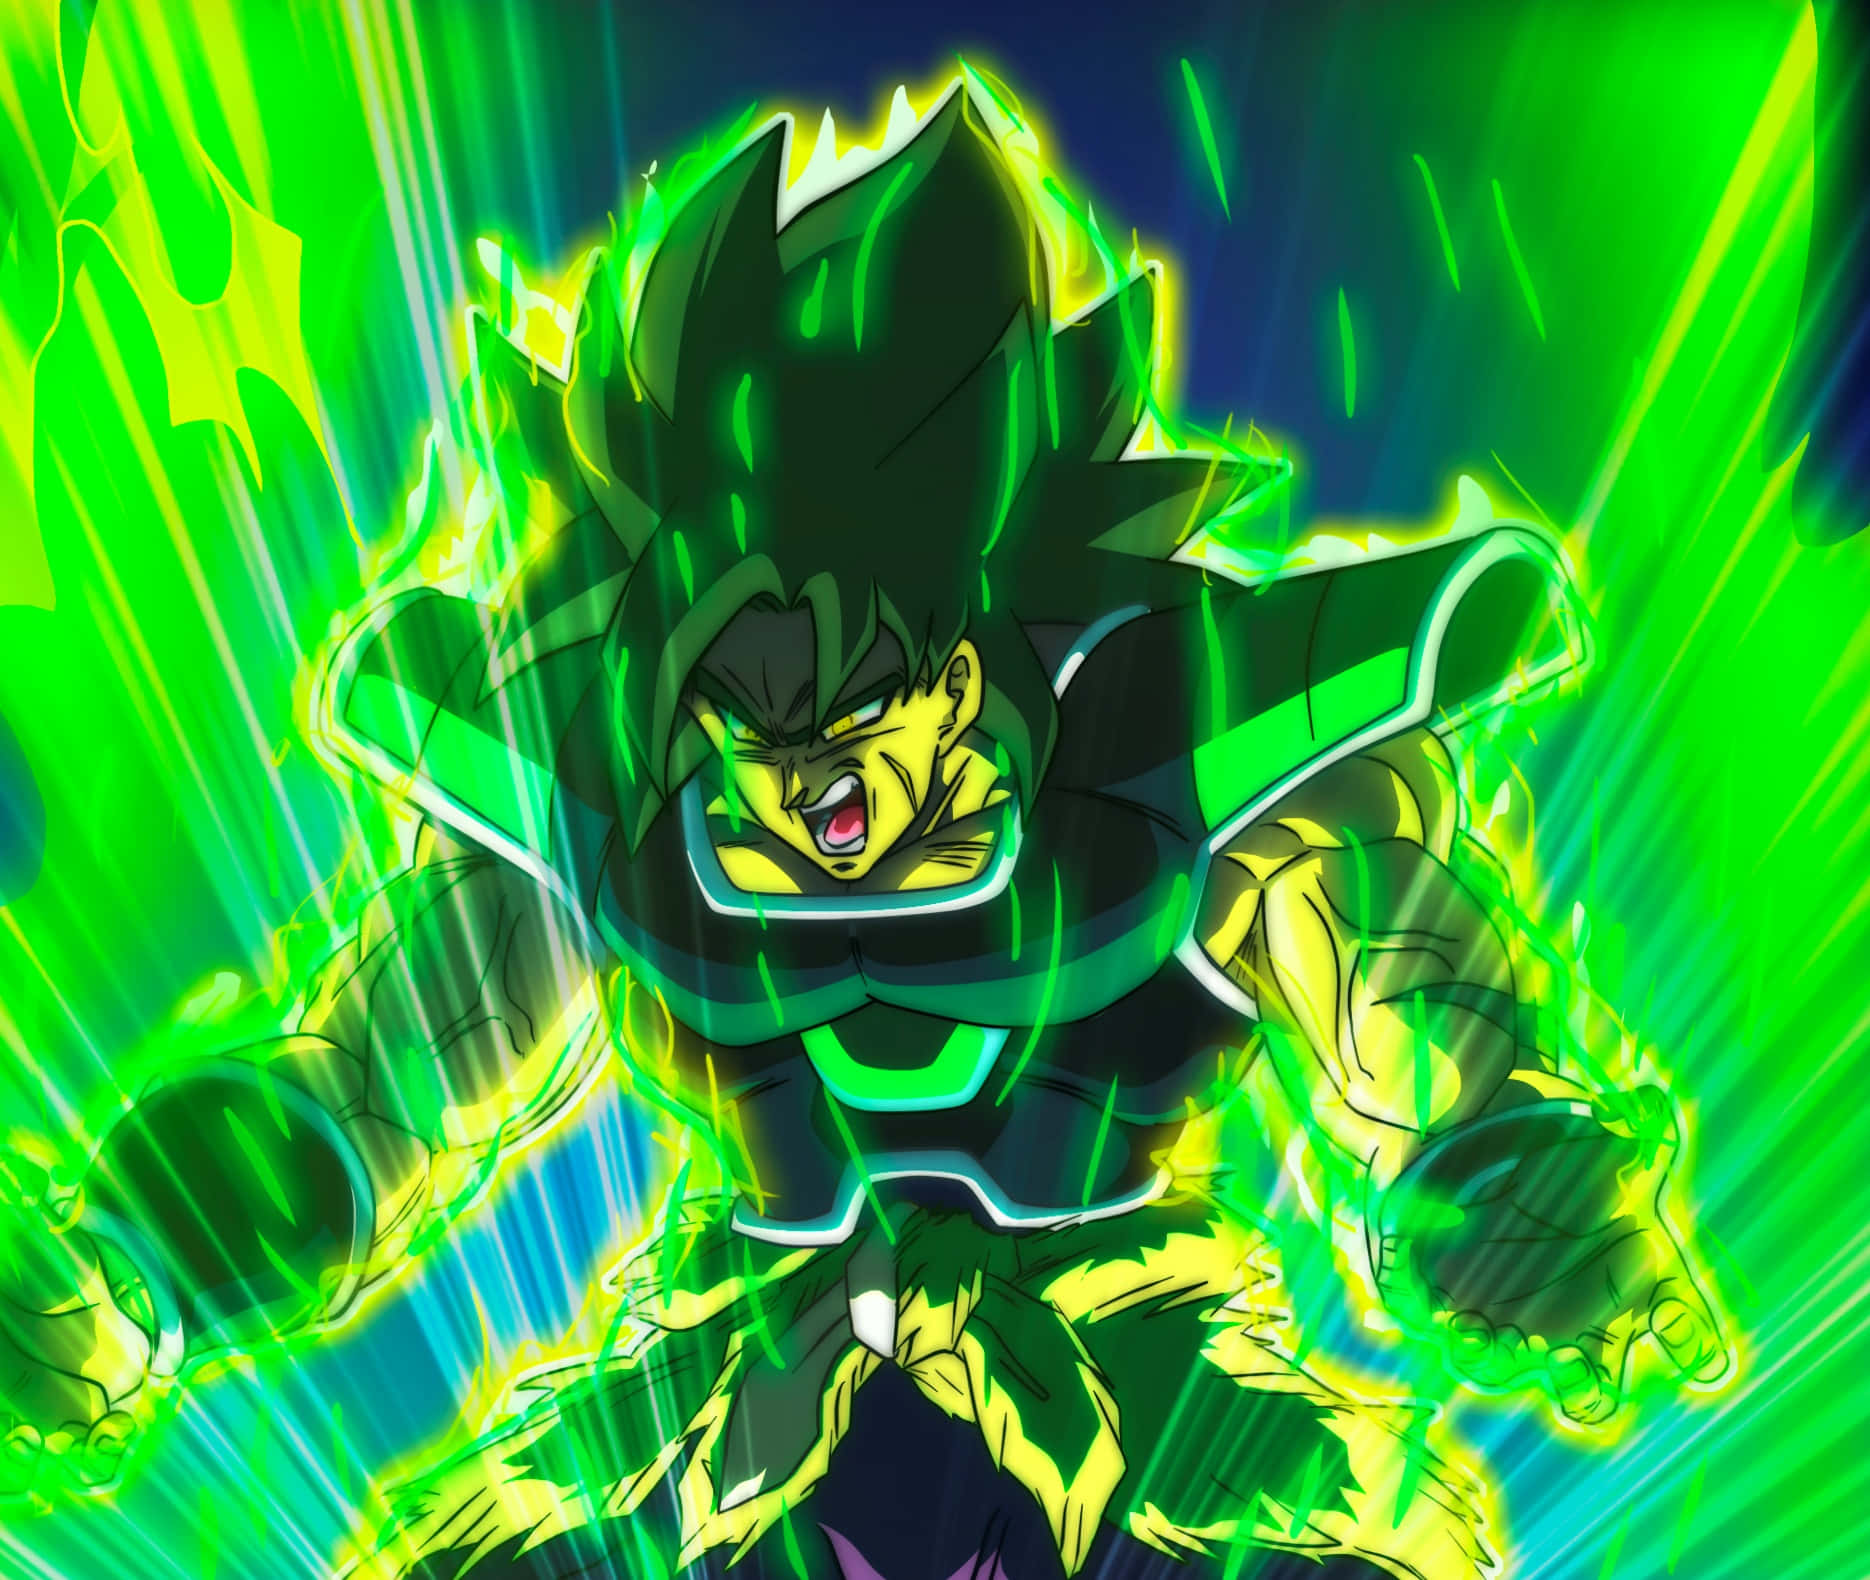 The Strongest Saiyan Warrior in Dragon Ball Super - Broly